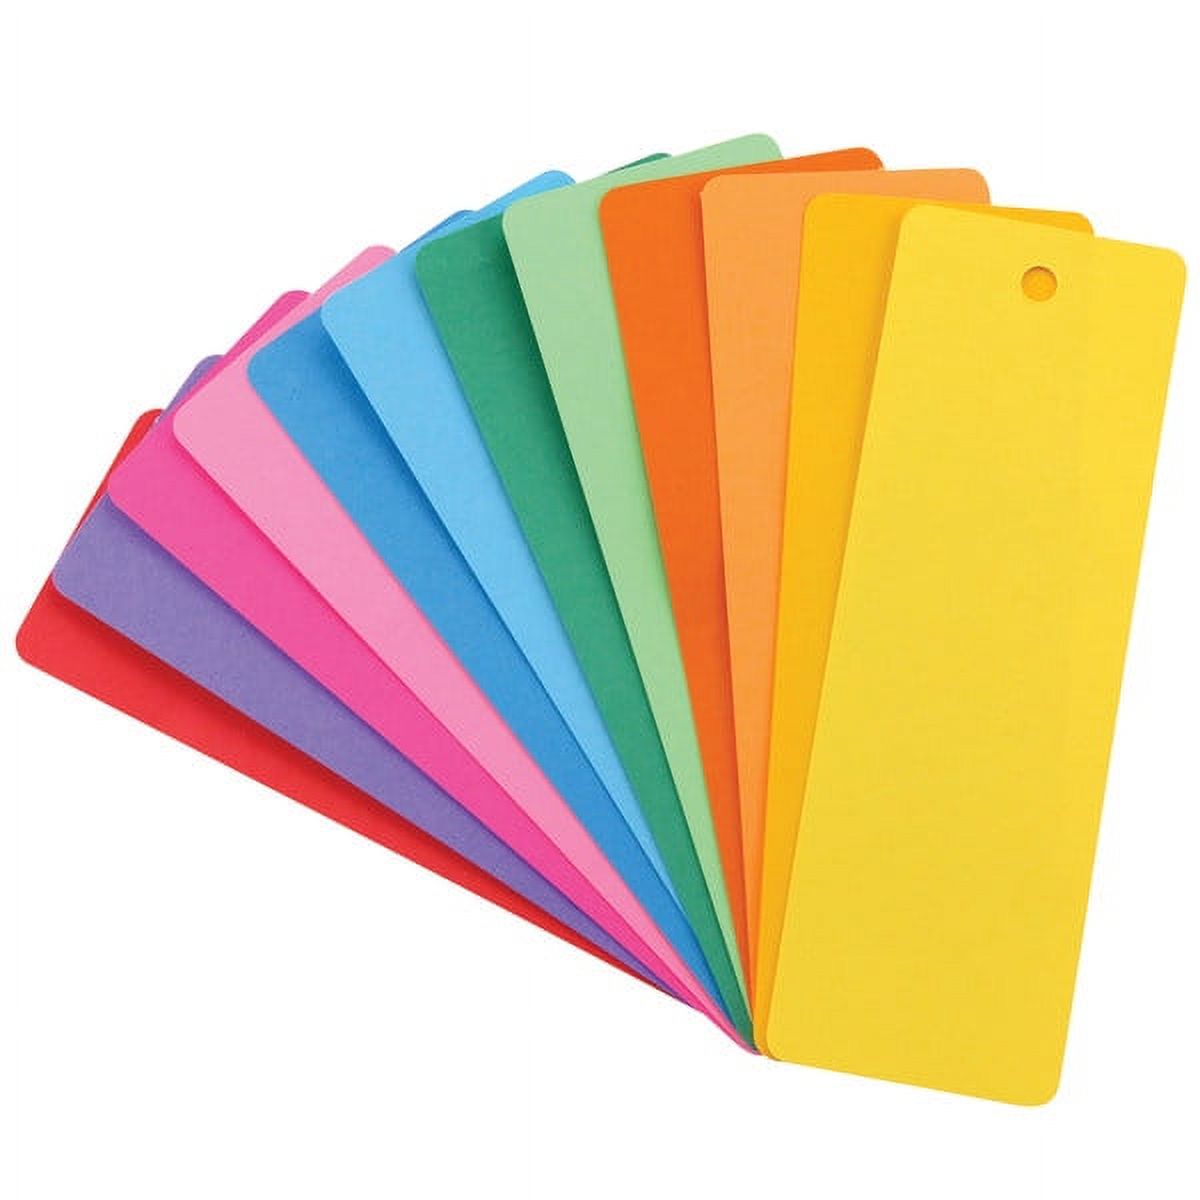 Hygloss 2" x 6" Blank Bookmarks Assorted 100/Pack HYG42610 - image 1 of 2